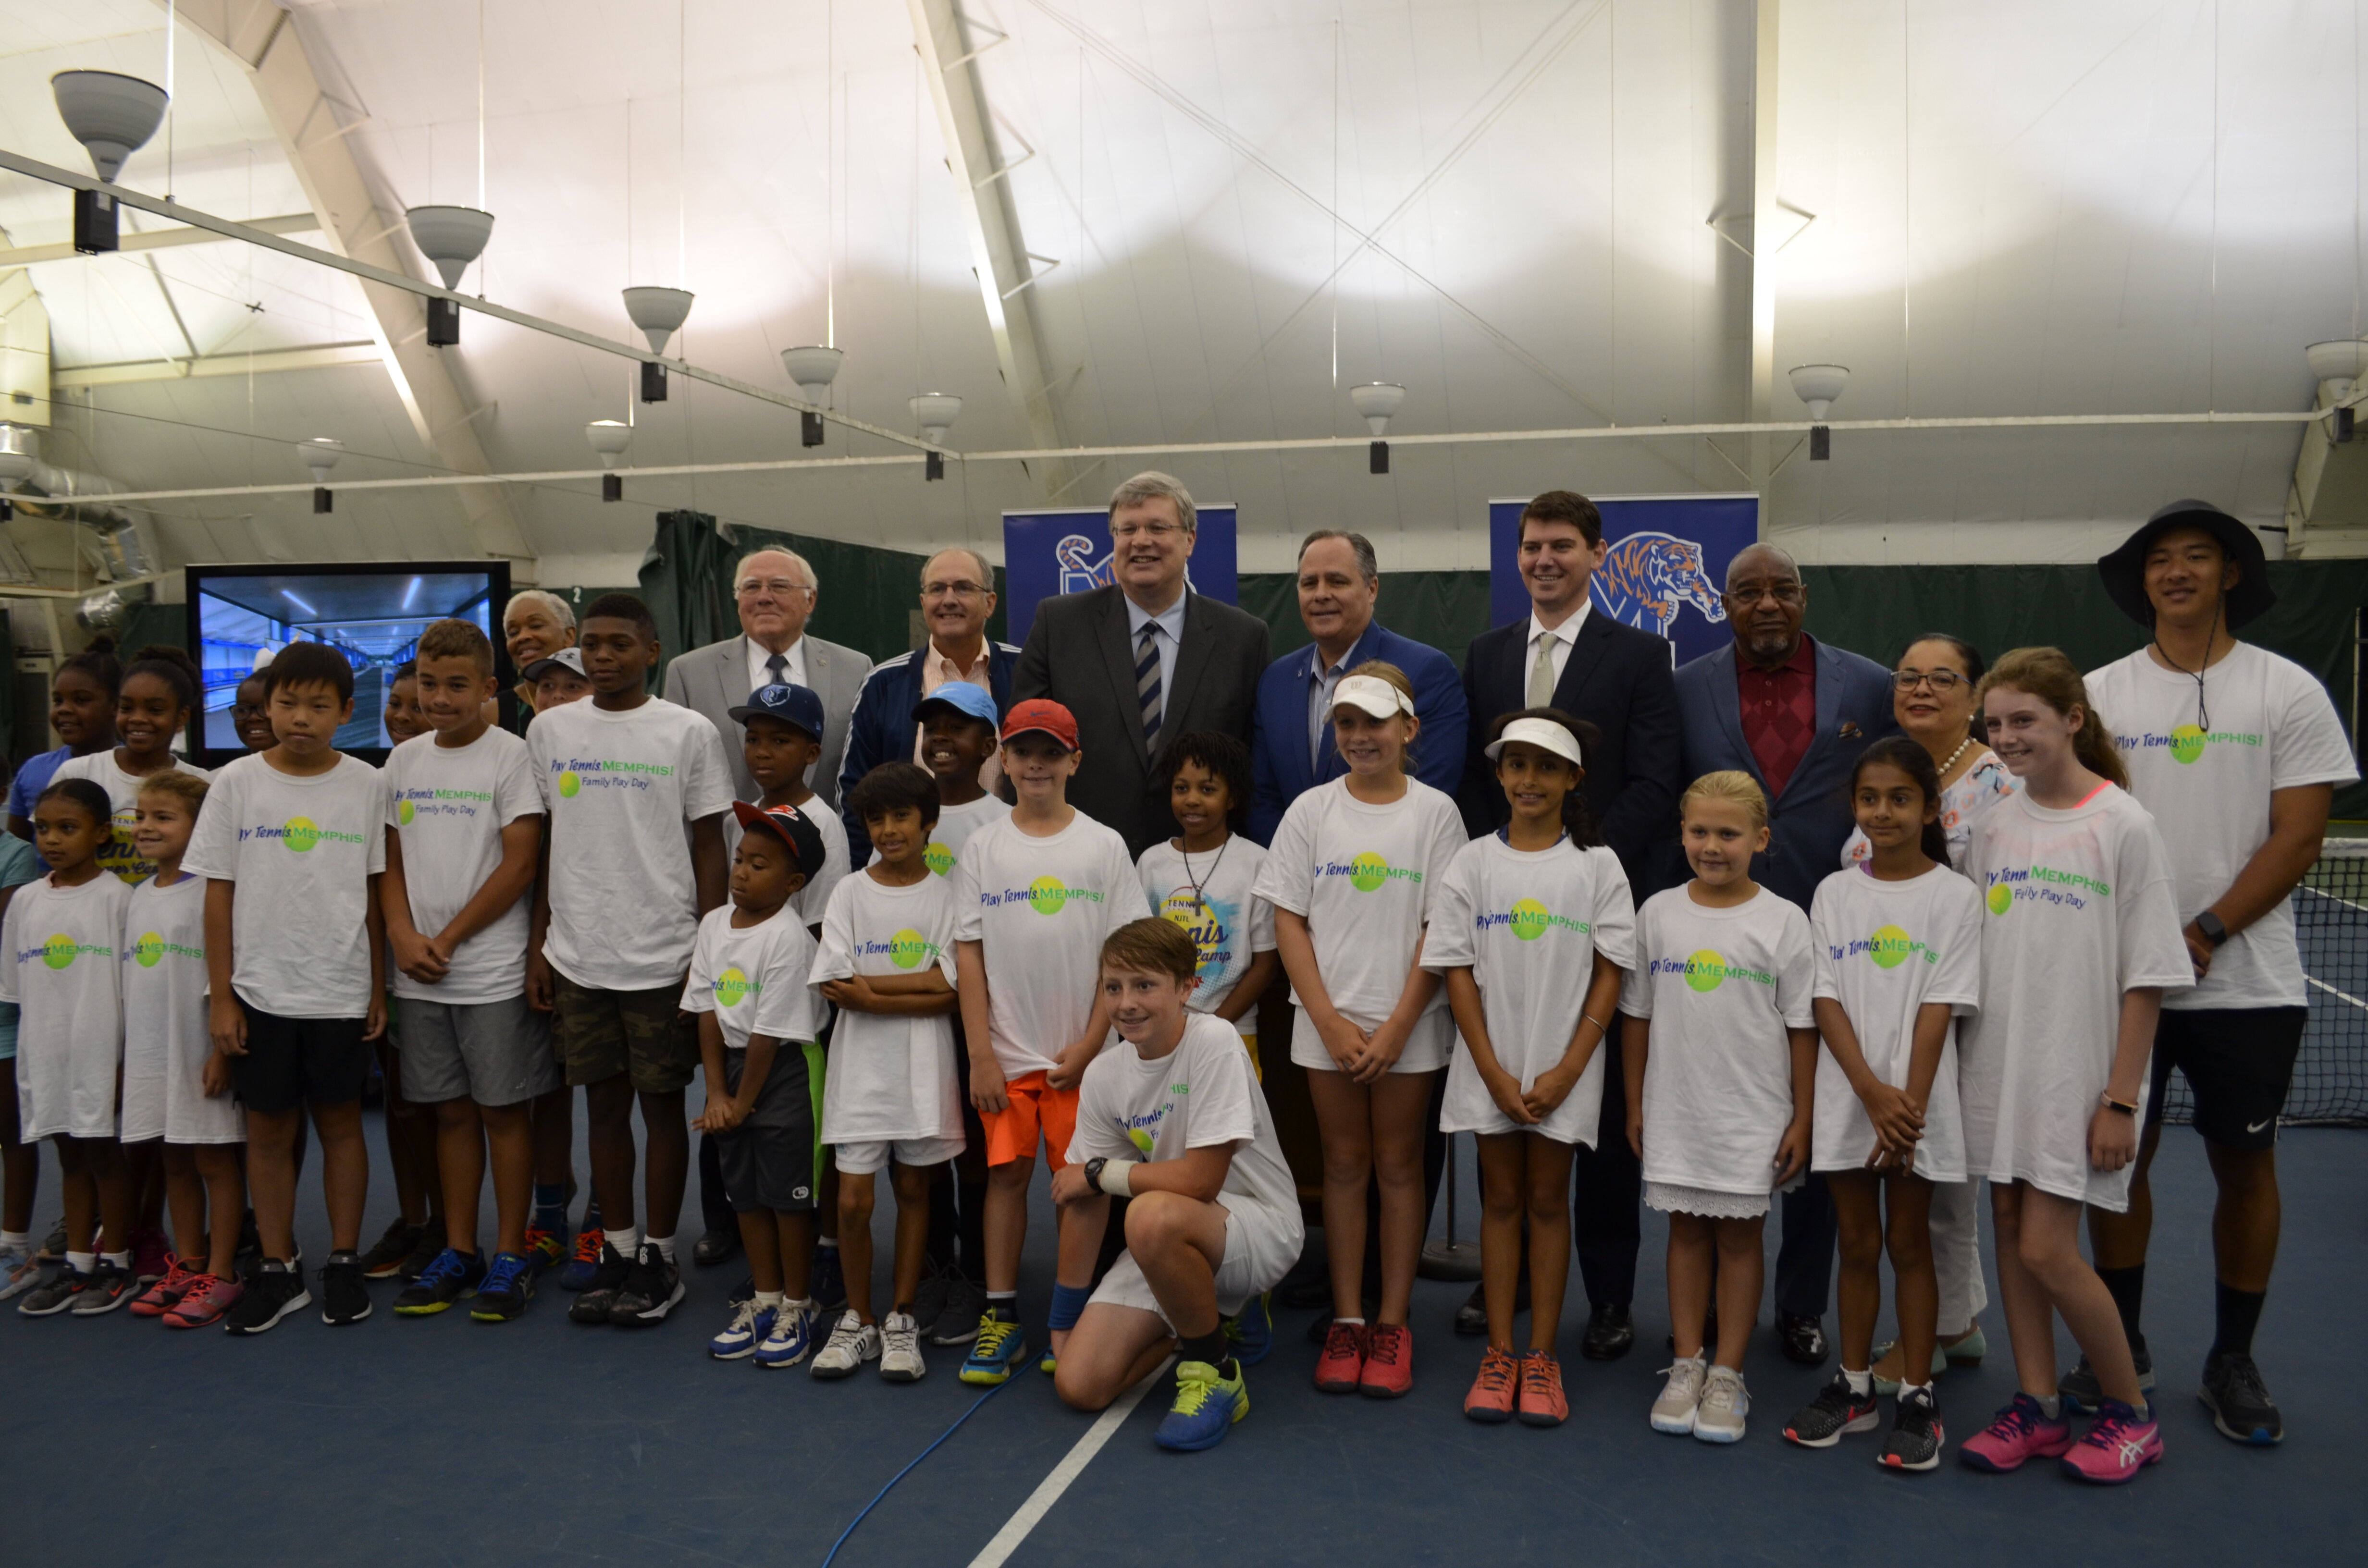 Leftwich tennis center renovation announcement press conference on Aug. 5, 2019. Back row from L to R: Former interim U of M athletic director Allie Prescott, Tennis Memphis Executive Director Stephen Lang, Memphis Mayor Jim Strickland, U of M Presid